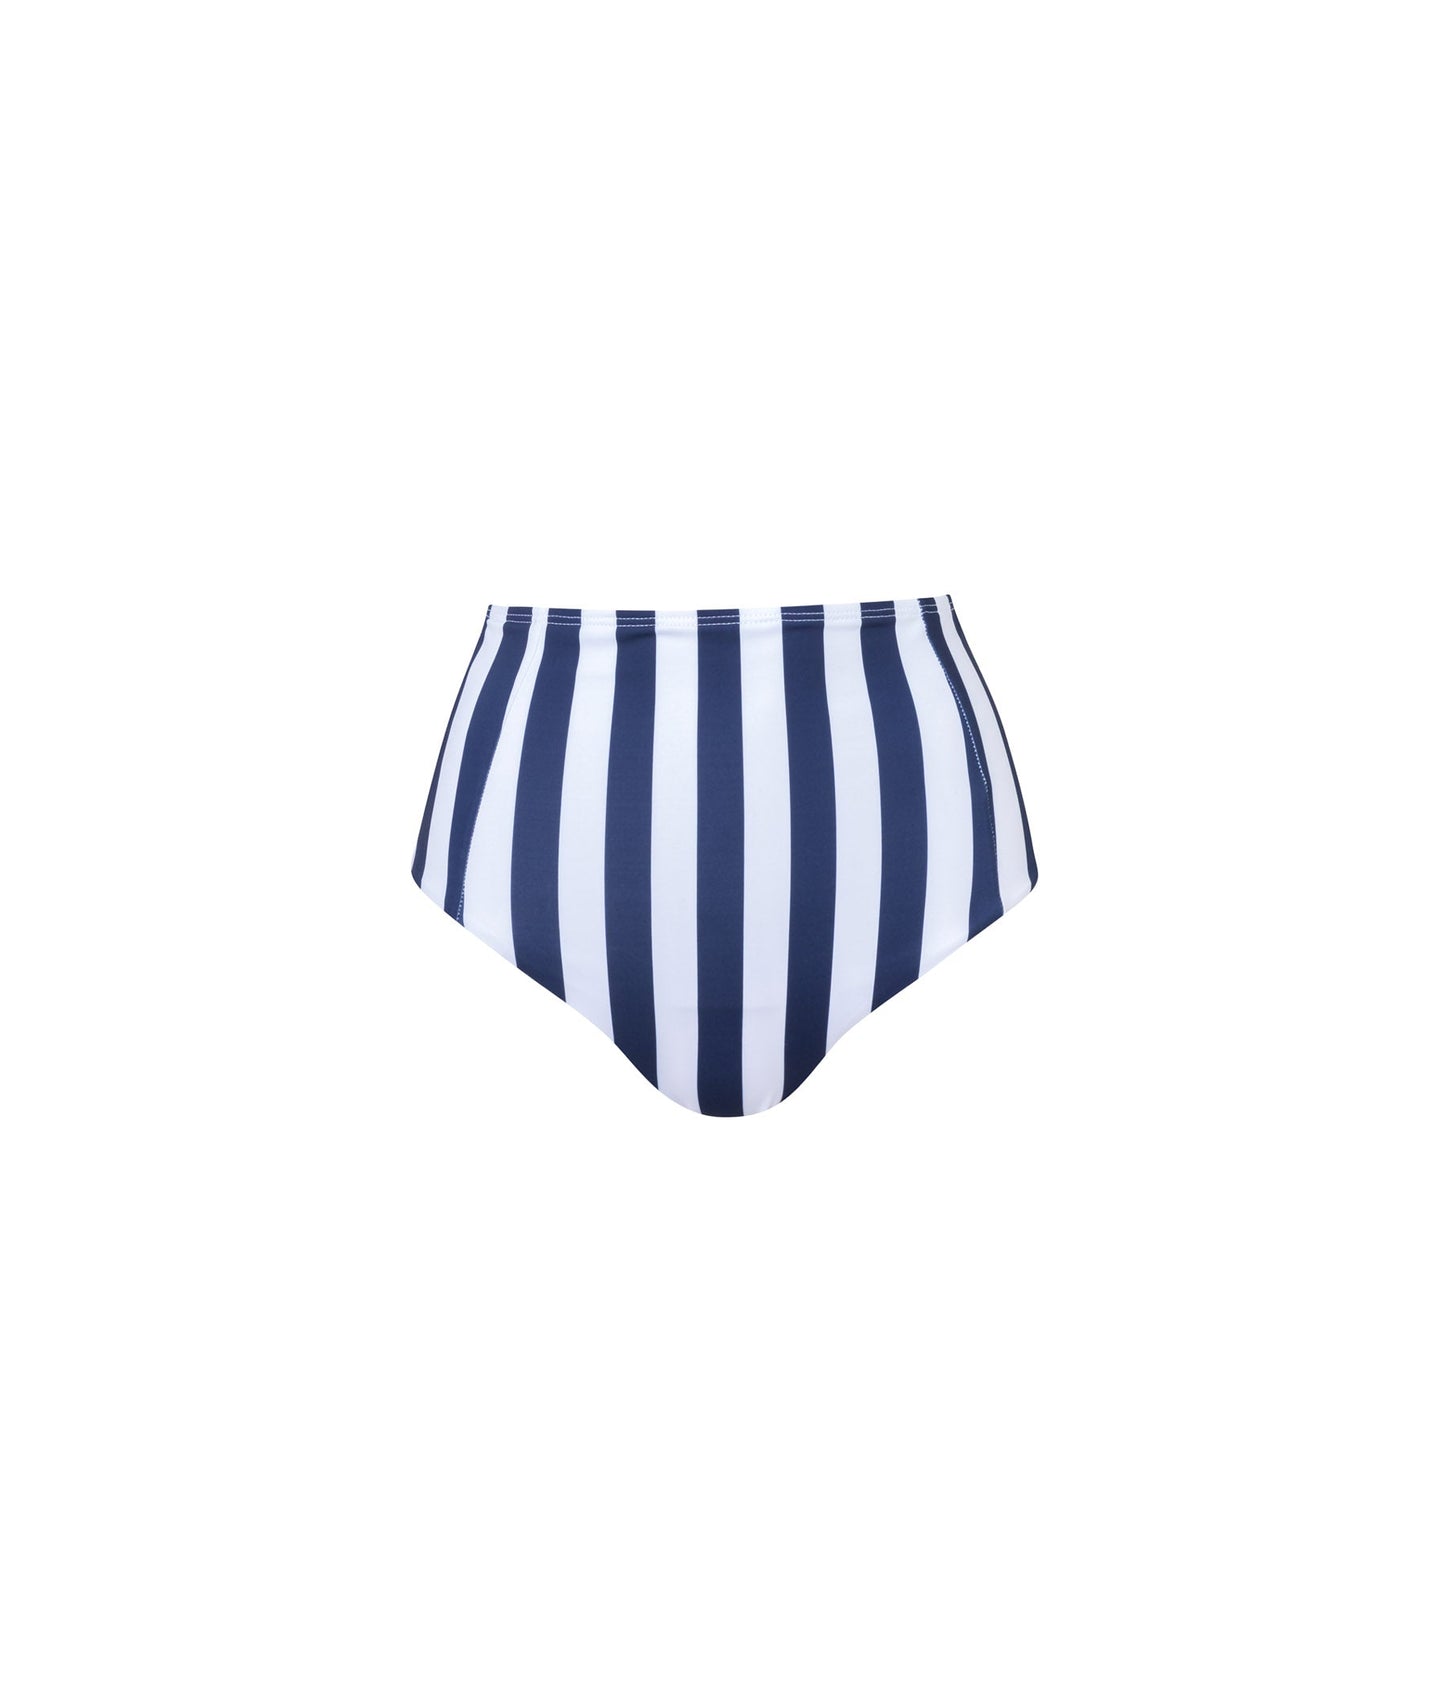 Load image into Gallery viewer, Verdelimon - Bottom - Banes - Navy Stripes - Front
